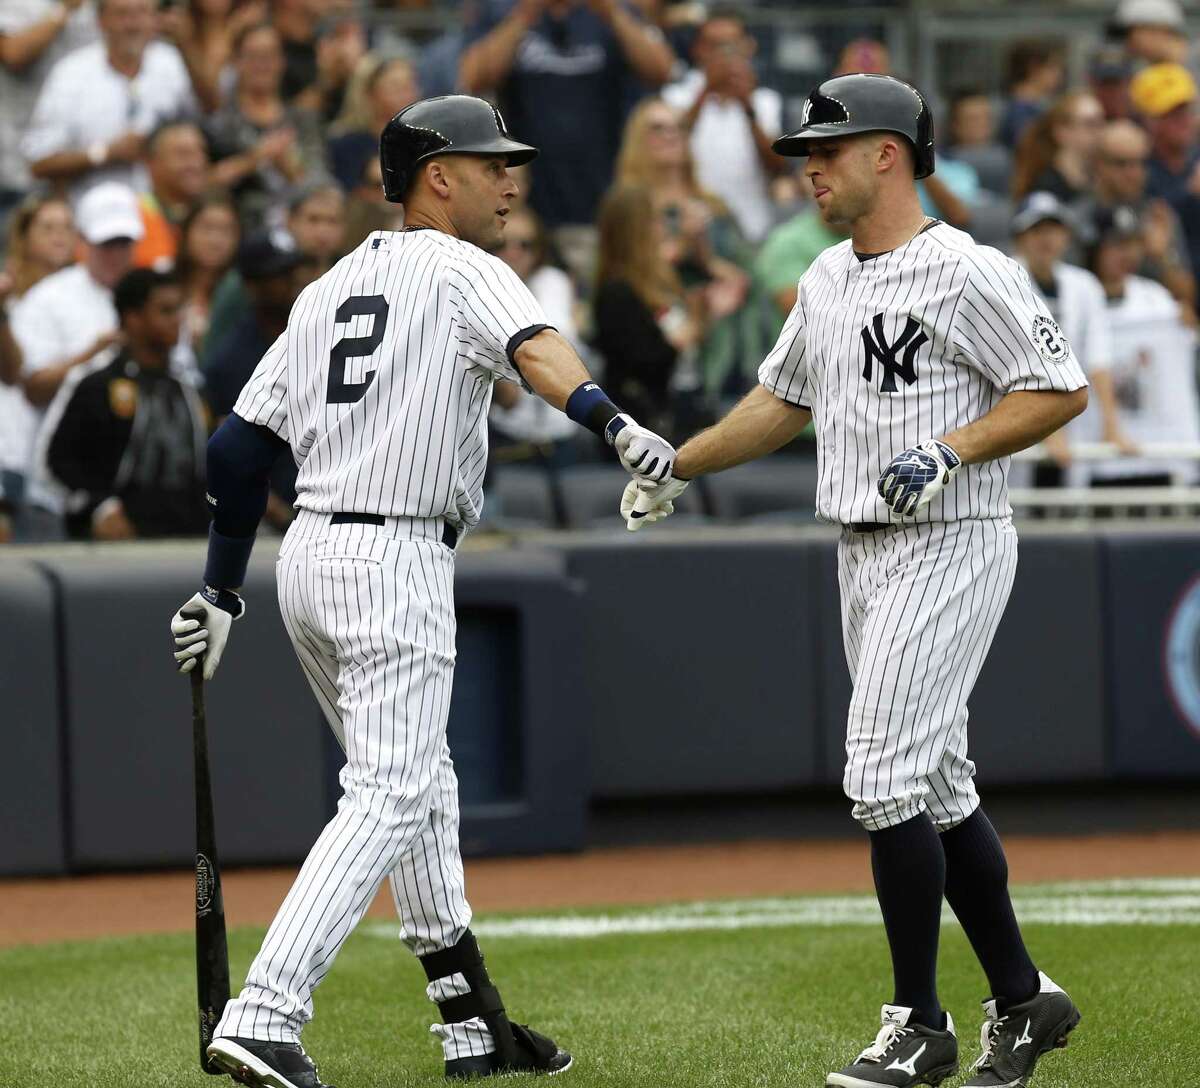 Brett Gardner, right, is greeted by Derek Jeter after he hit a solo home run during the fifth inning Sunday.